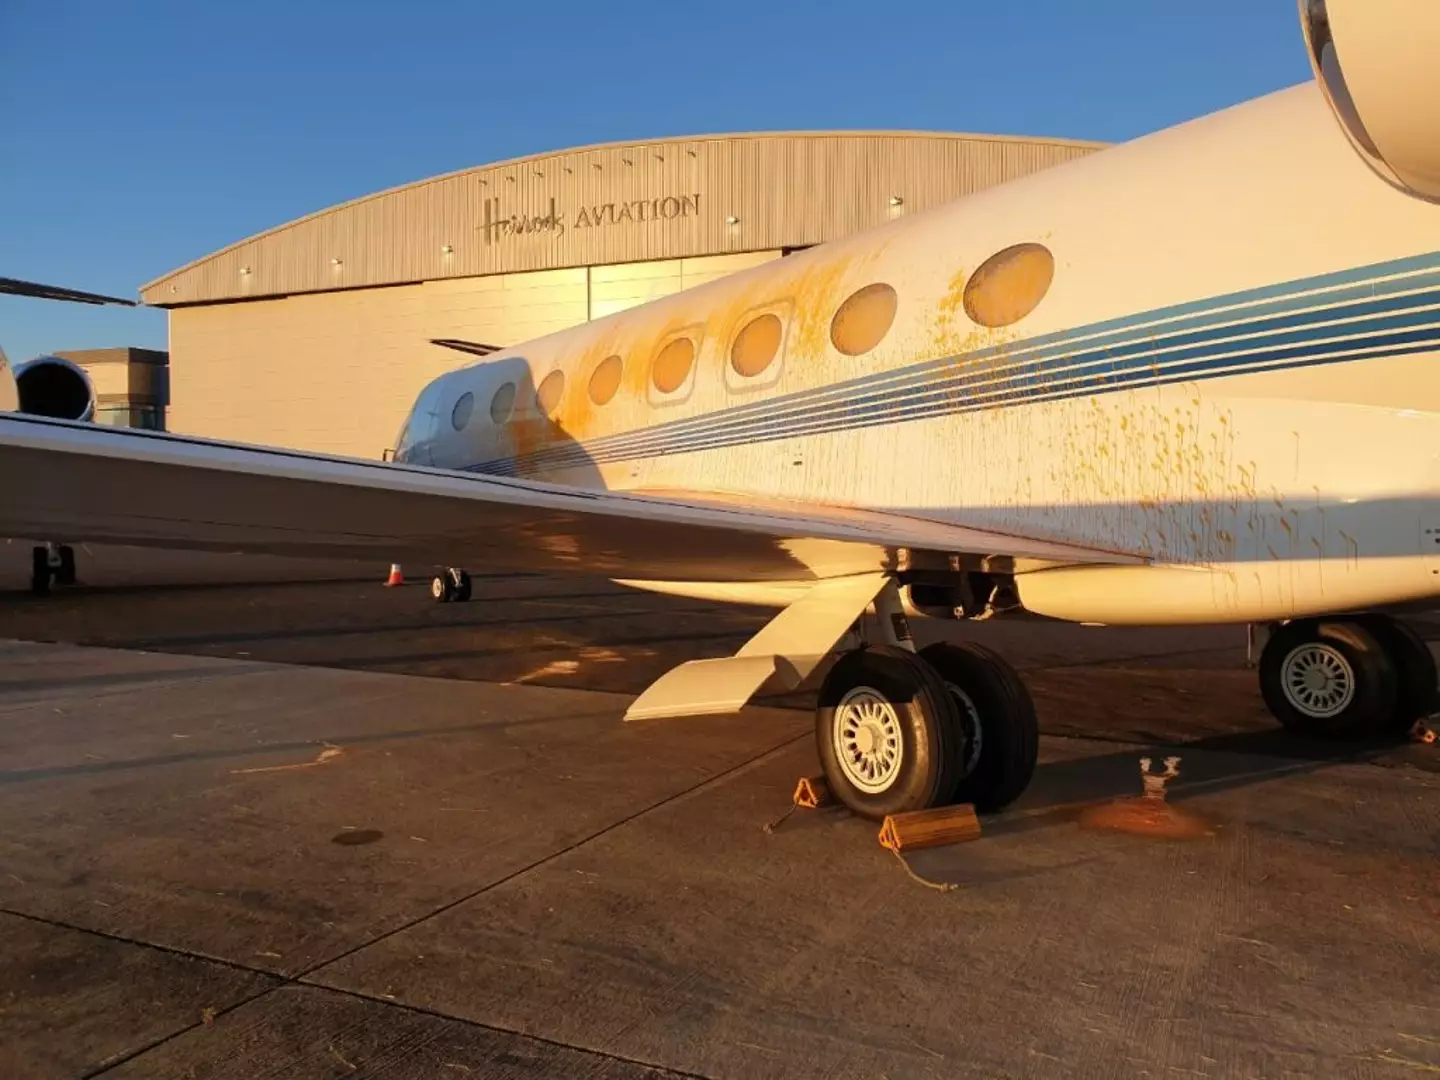 The group claimed Taylor Swift's jet was parked there. (Just Stop Oil)